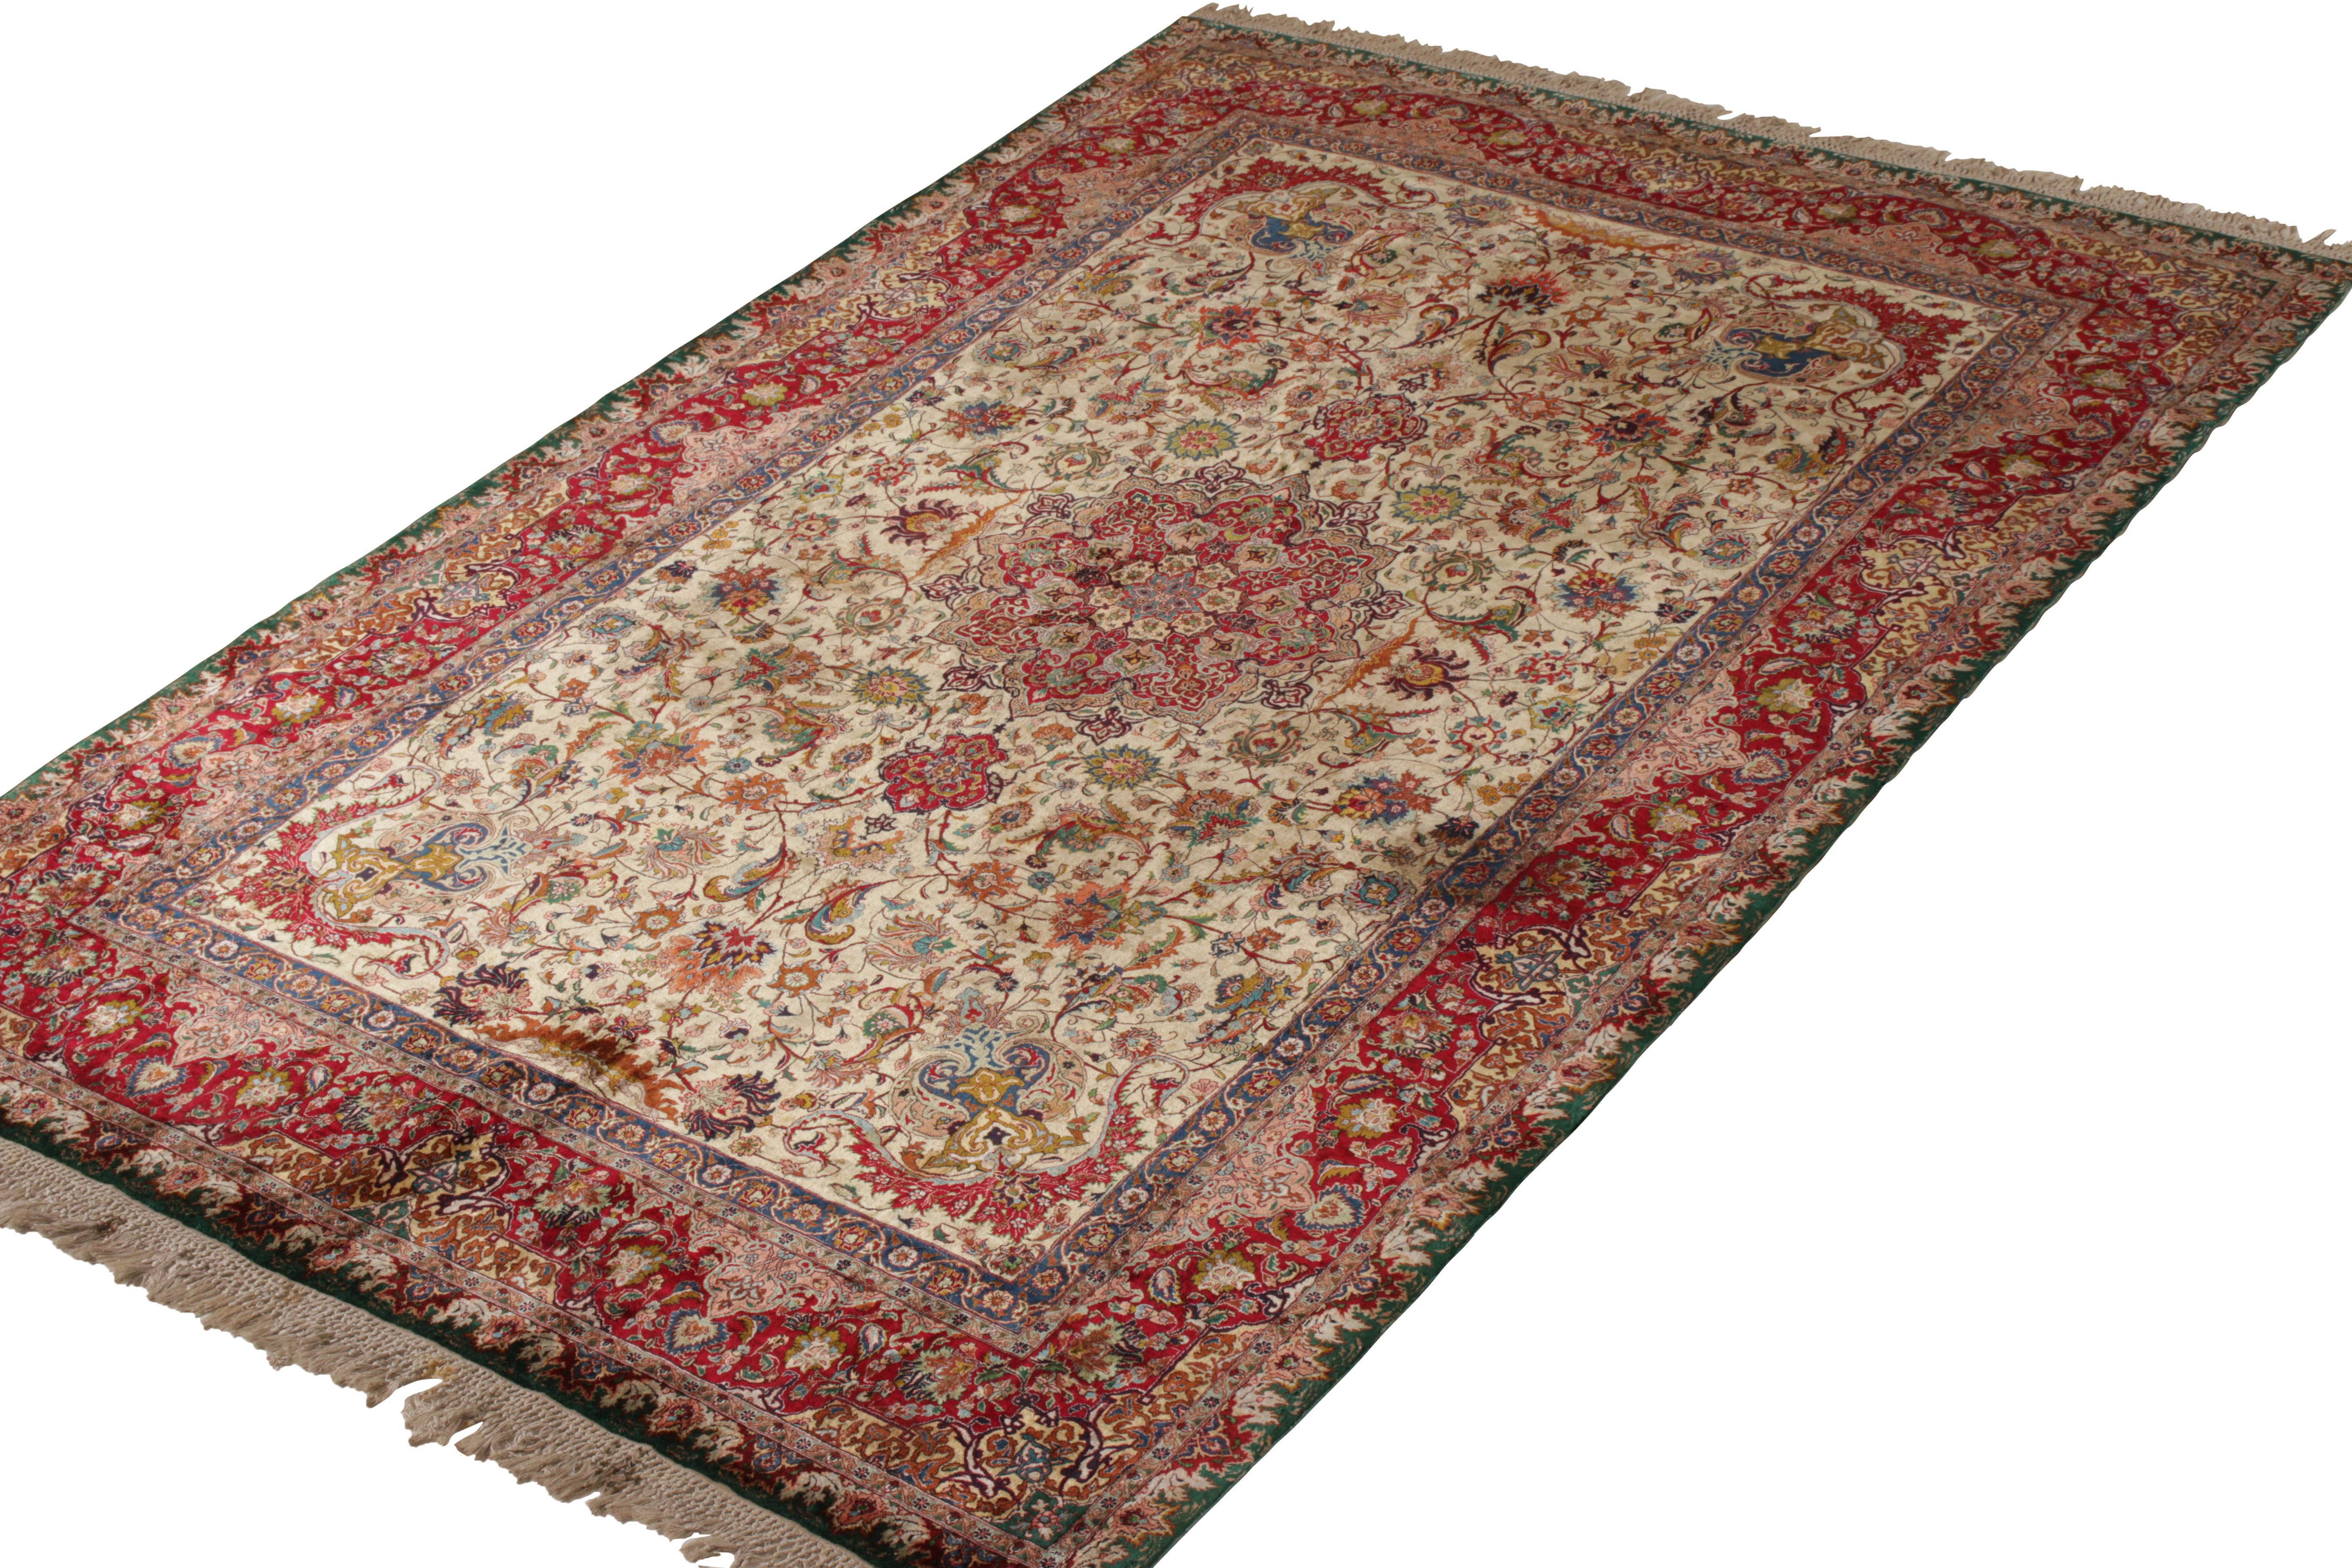 A 7x10 vintage Persian rug of Tabriz origin, hand knotted in finely woven silk warps circa 1950-1960. A regal choice exemplifying the finest, most rare vintage Tabriz rug styles Josh has seen in our extensive classic collection. 

Further on the